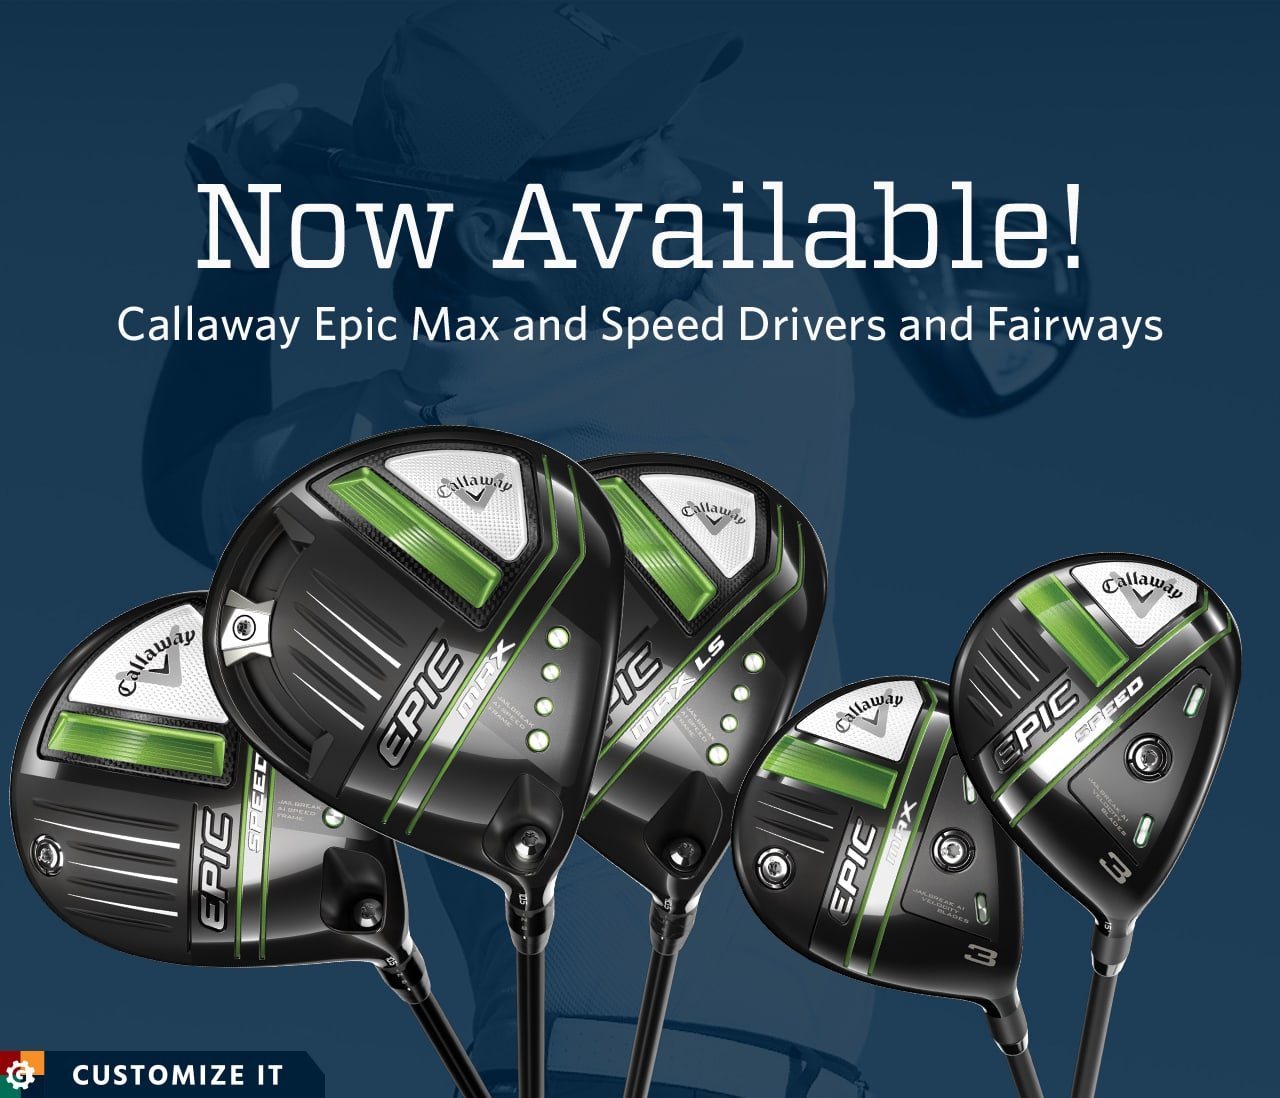 Now available. Callaway epic max and speed drivers and fairways. Customize it.